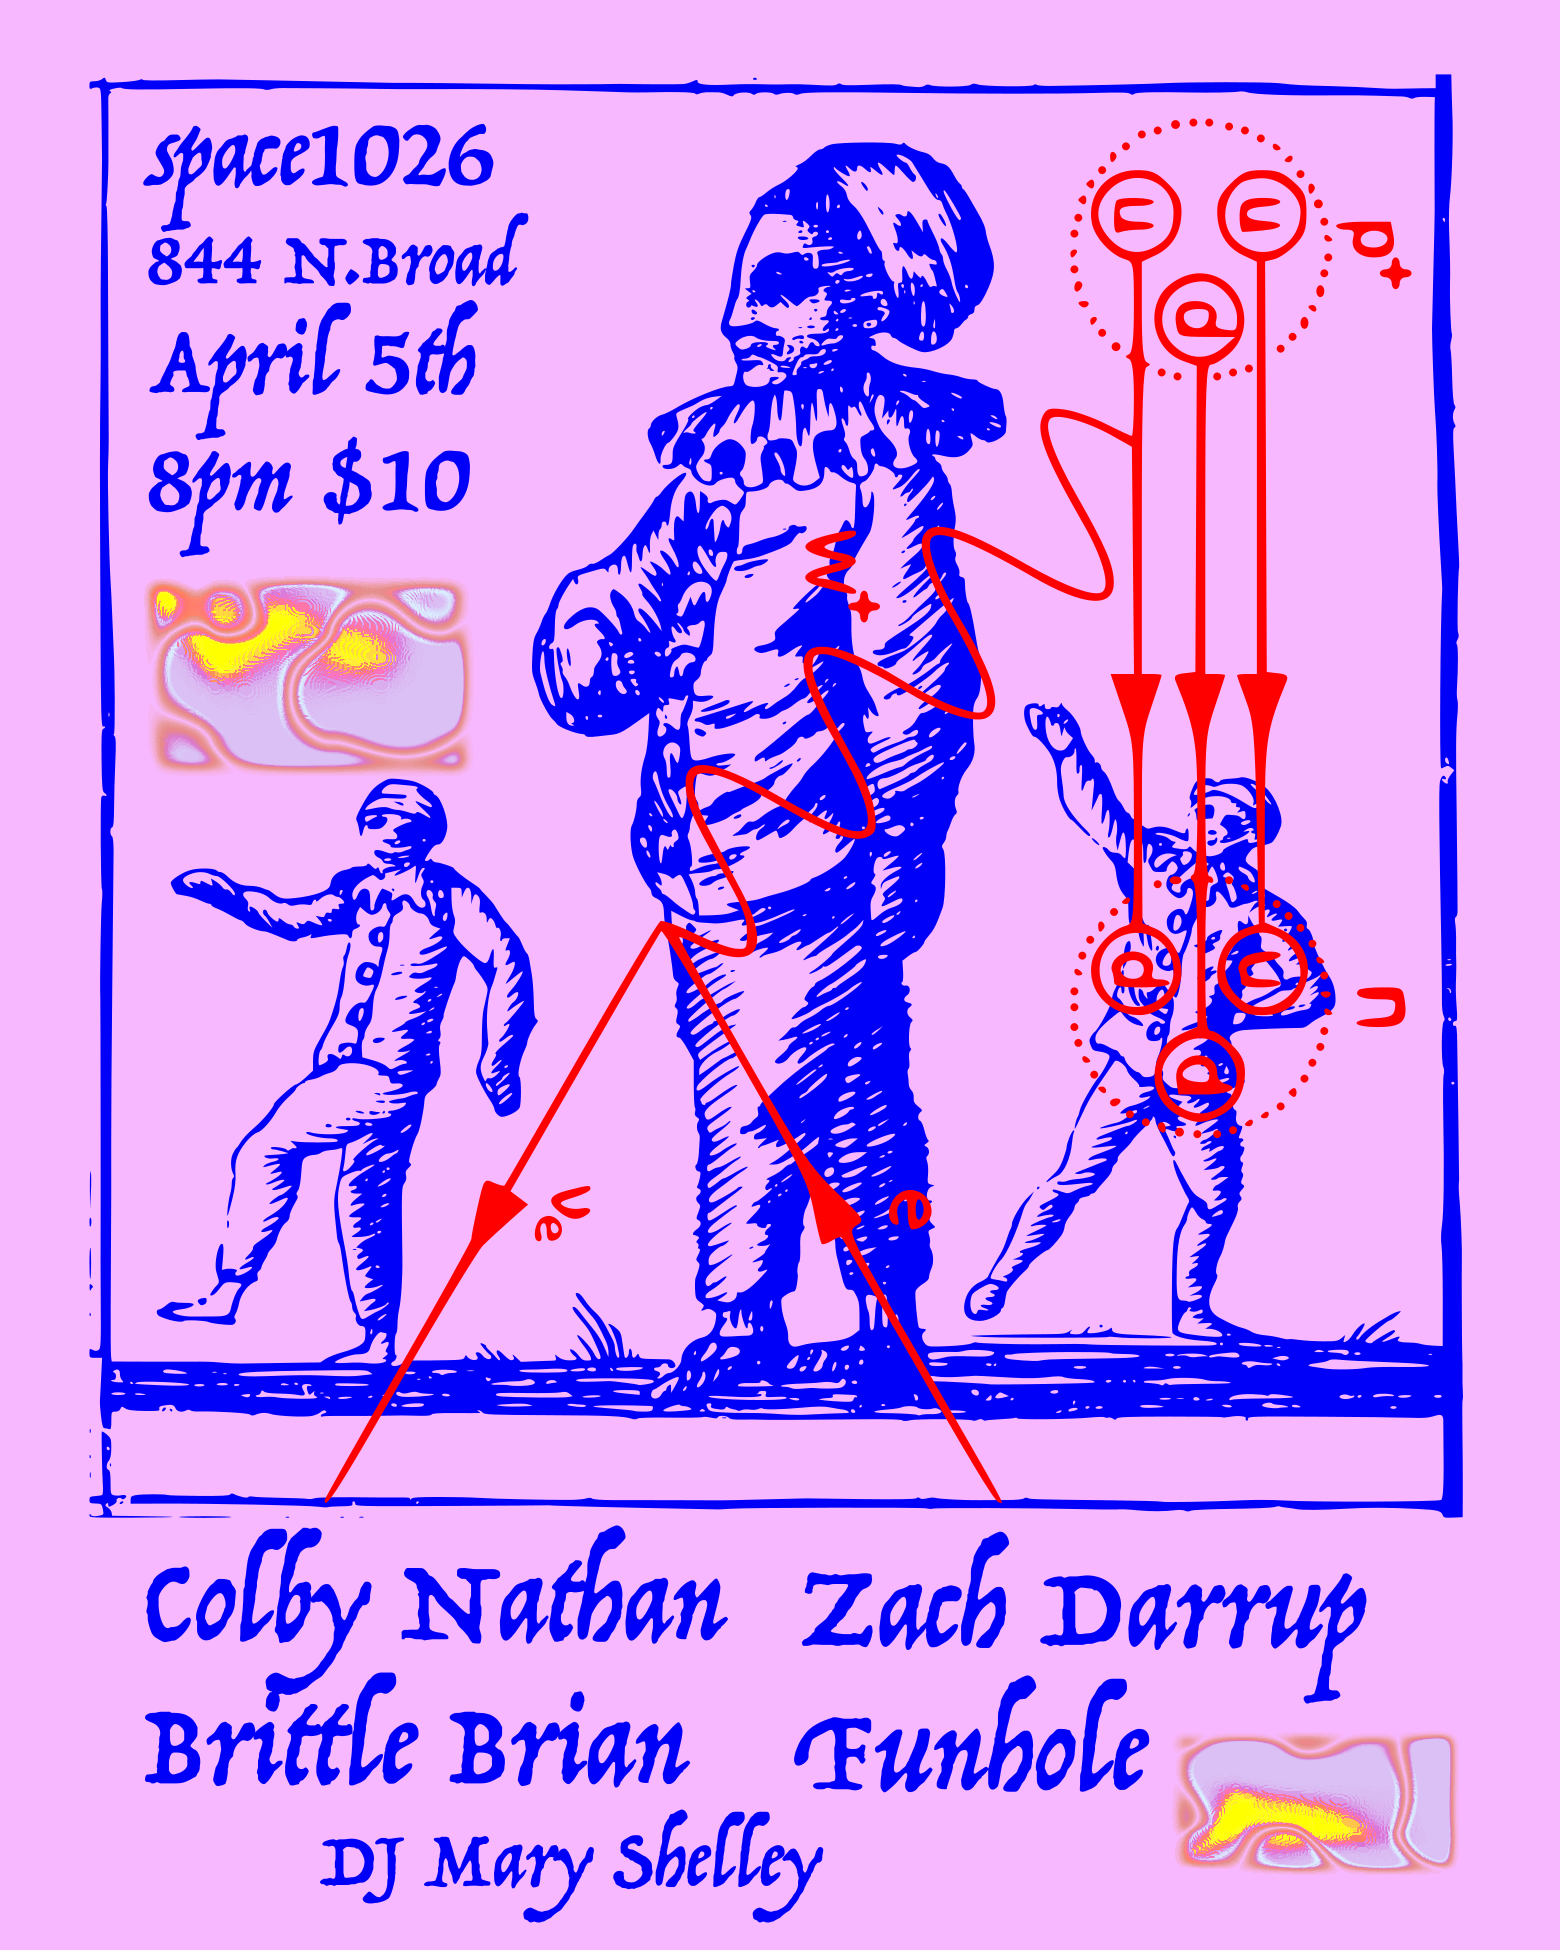 Flier by Lance Simmons